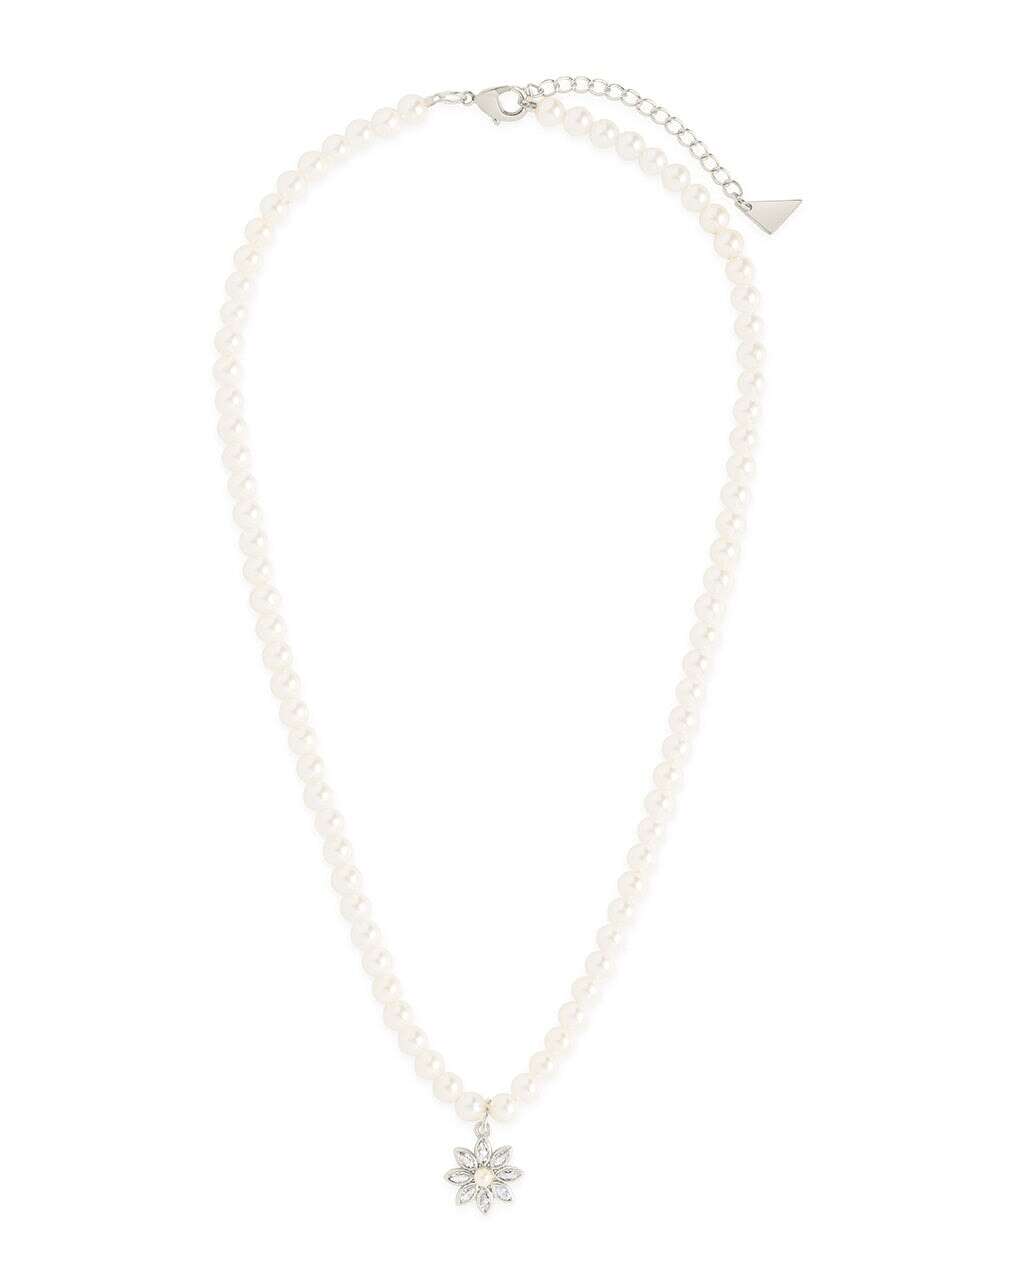 Esti Pearl Necklace Necklace Sterling Forever 